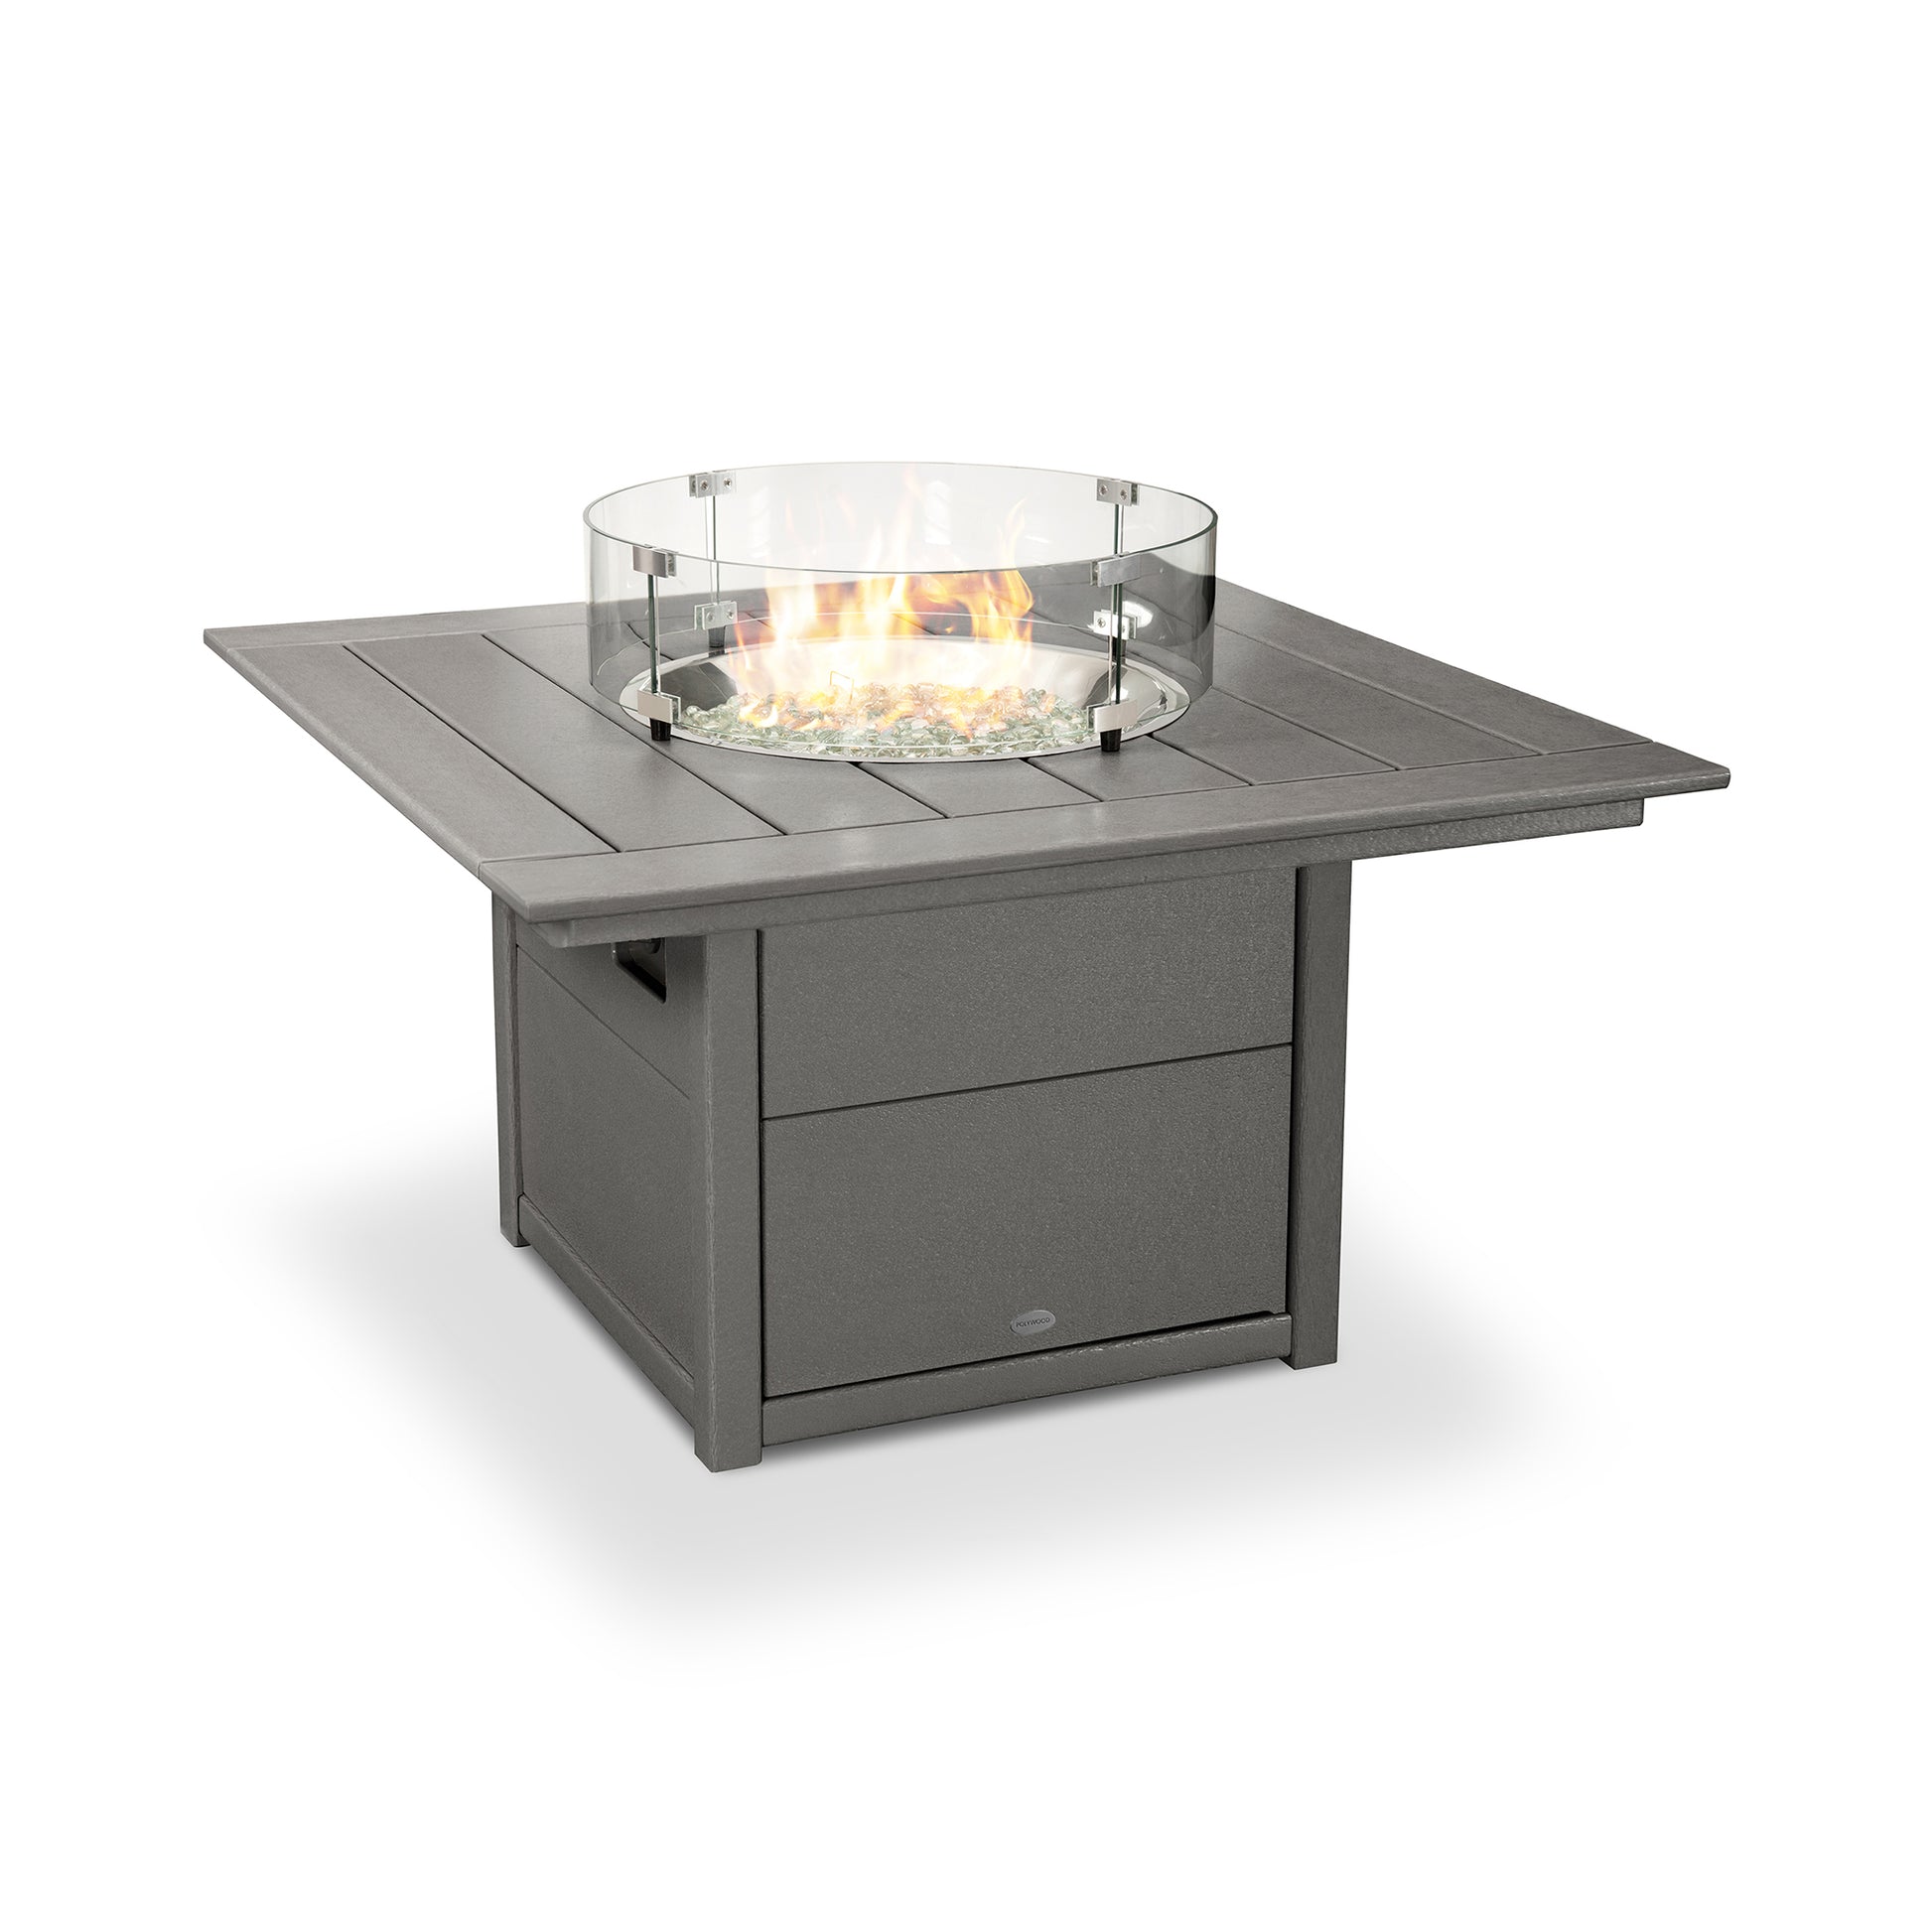 A square POLYWOOD Square 42" Fire Pit Table with a glass wind guard, set against a white background. The table is constructed from grey paneled metal, featuring centralized flames and a lower shelf for storage.